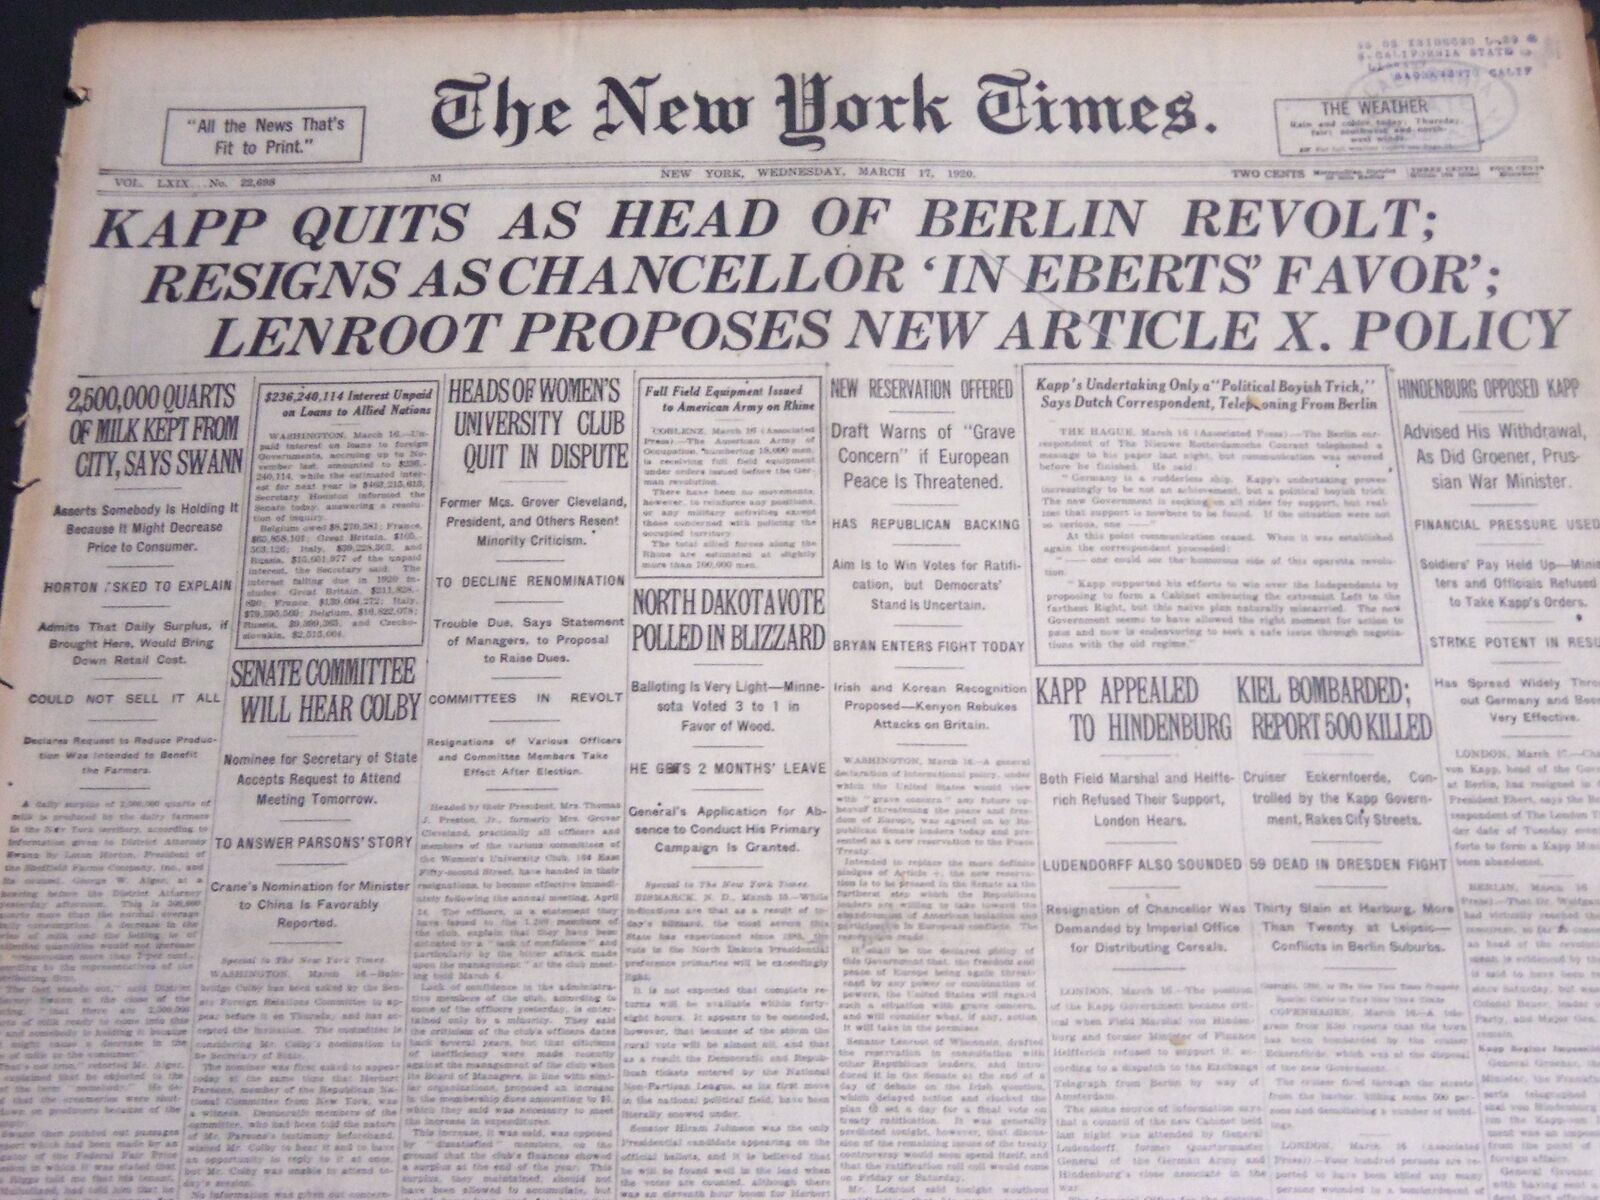 1920 MARCH 17 NEW YORK TIMES - KAPP QUITS AS HEAD OF BERLIN REVOLT - NT 6767